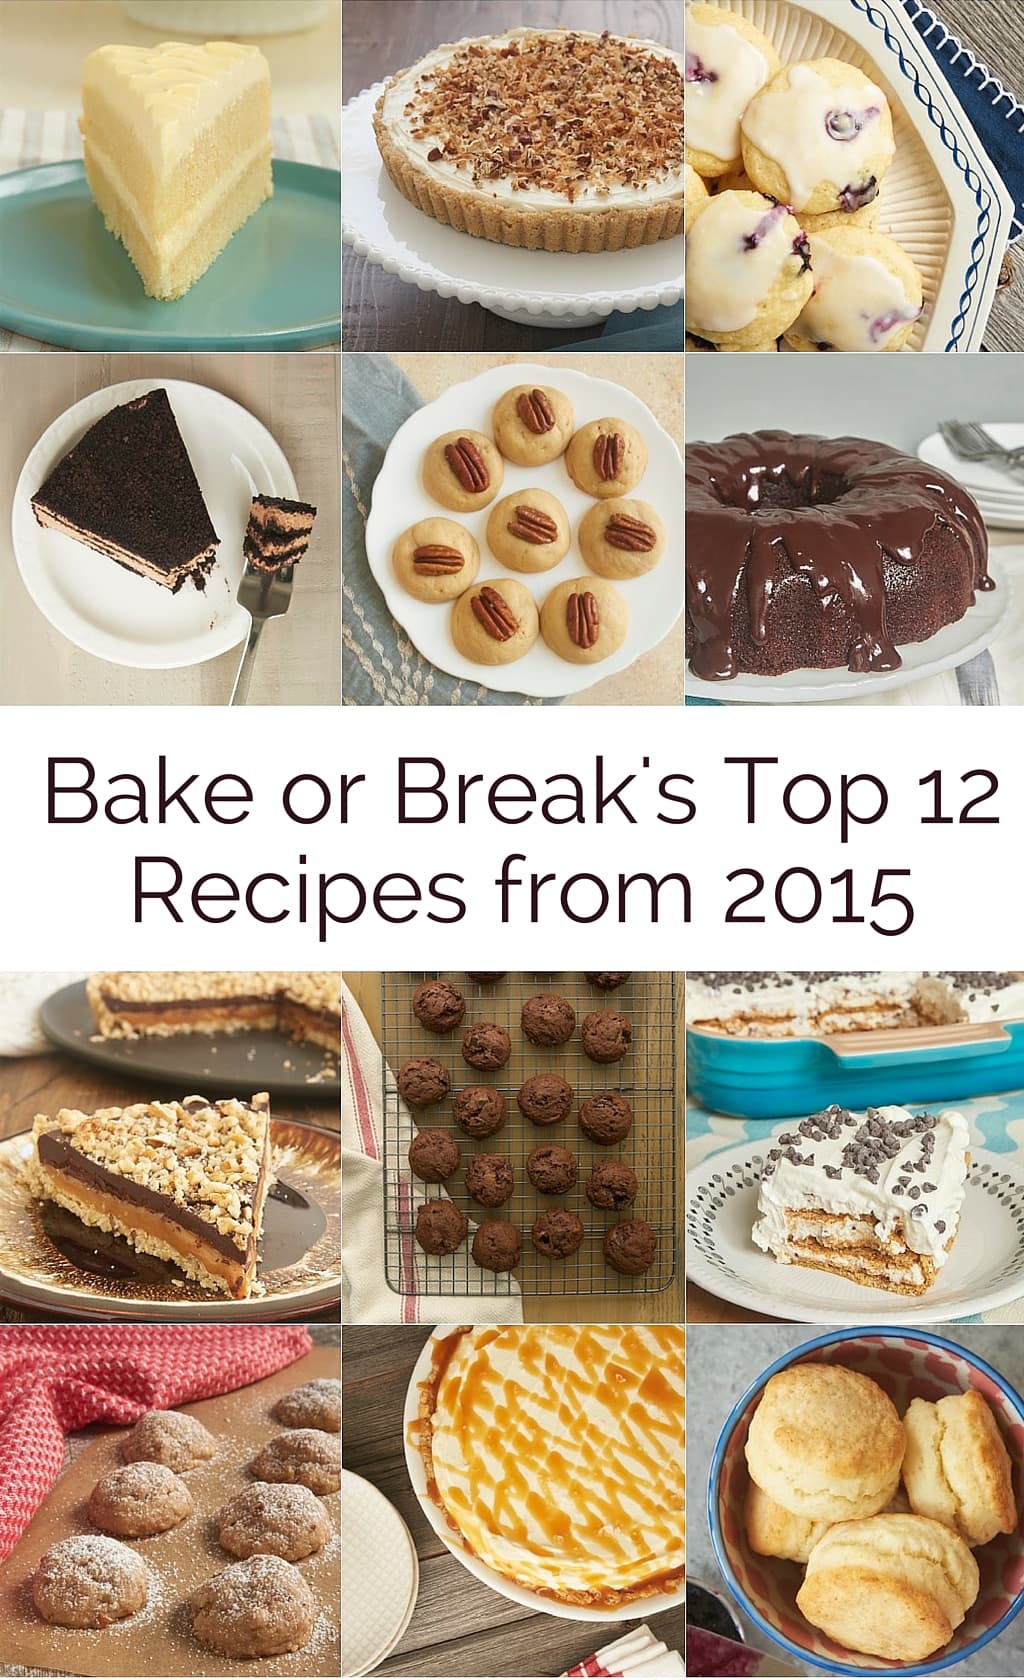 Bake or Break's most popular recipes from 2015